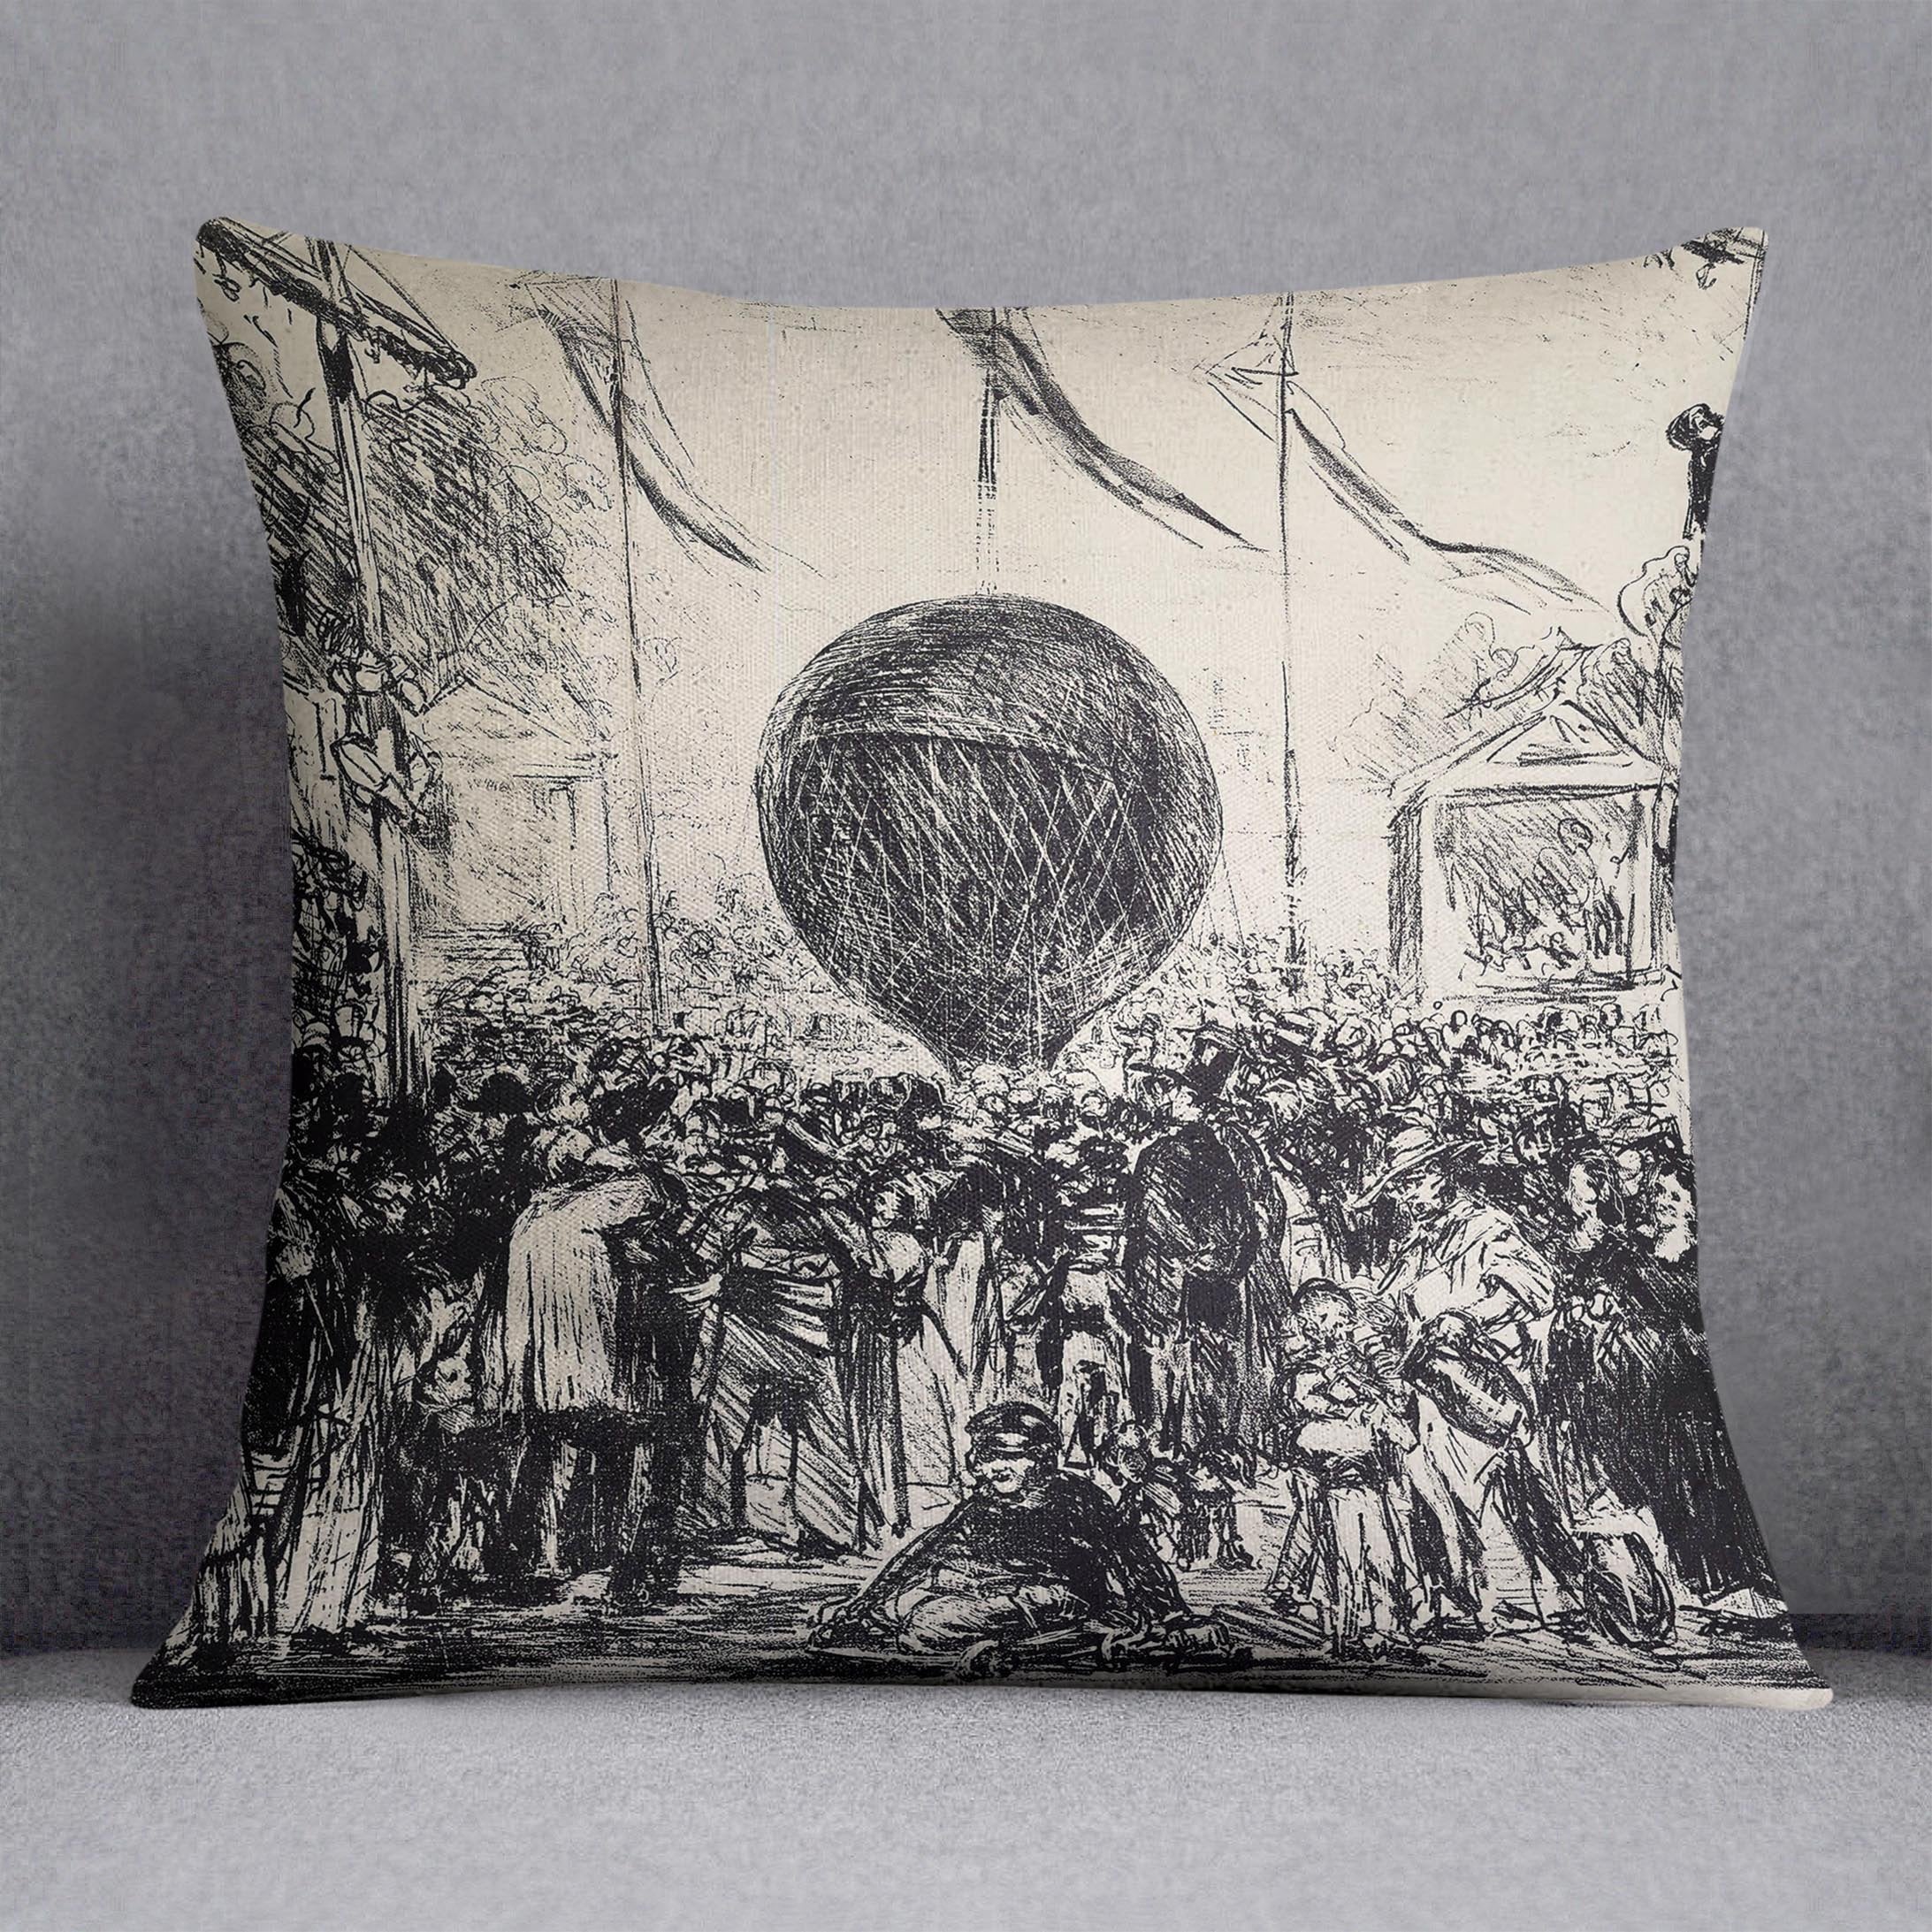 The Balloon by Manet Throw Pillow